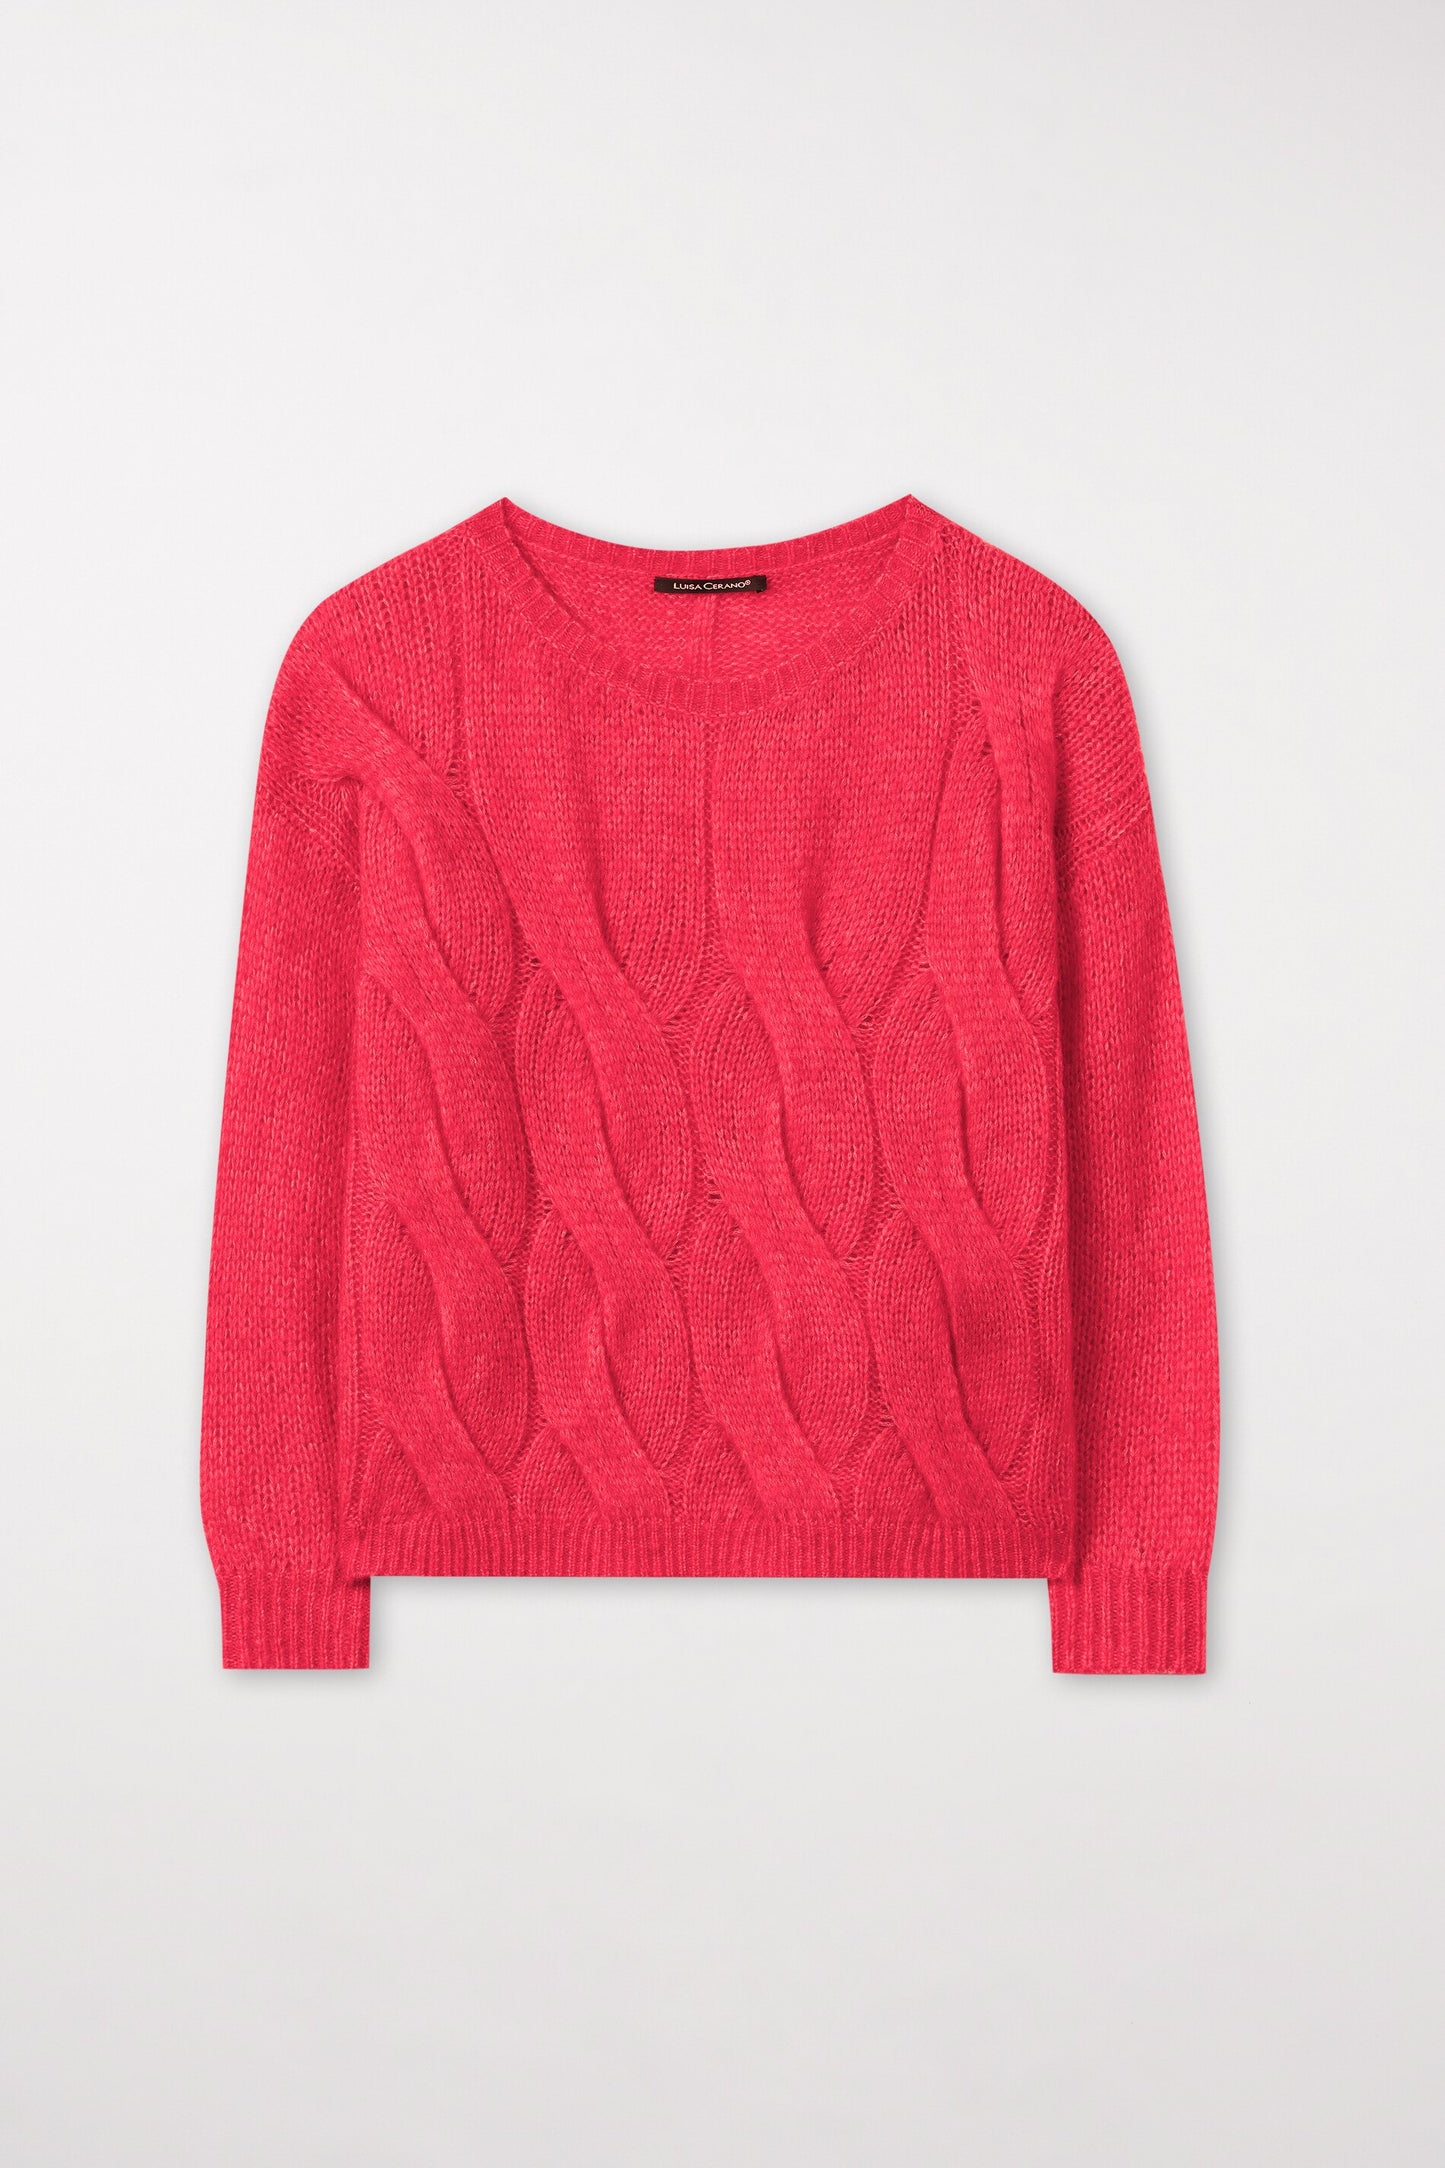 Knitted sweater with cable pattern